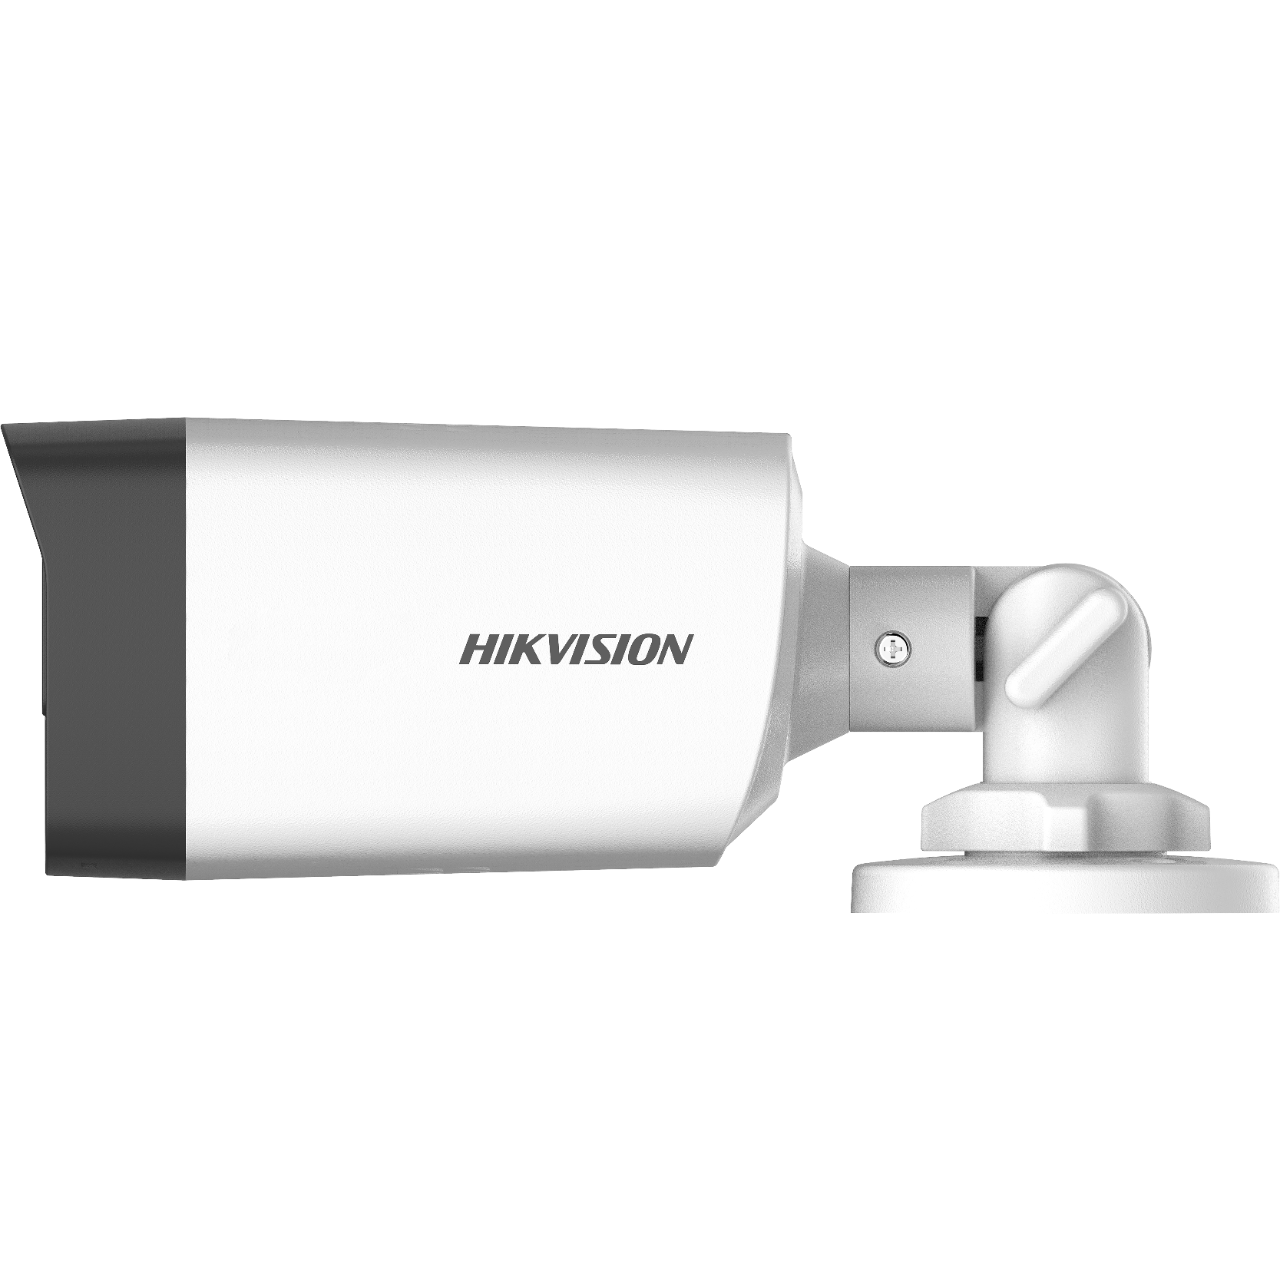 Hikvision (DS-2CE17H0T-IT1F) 5 MP Fixed Bullet Camera